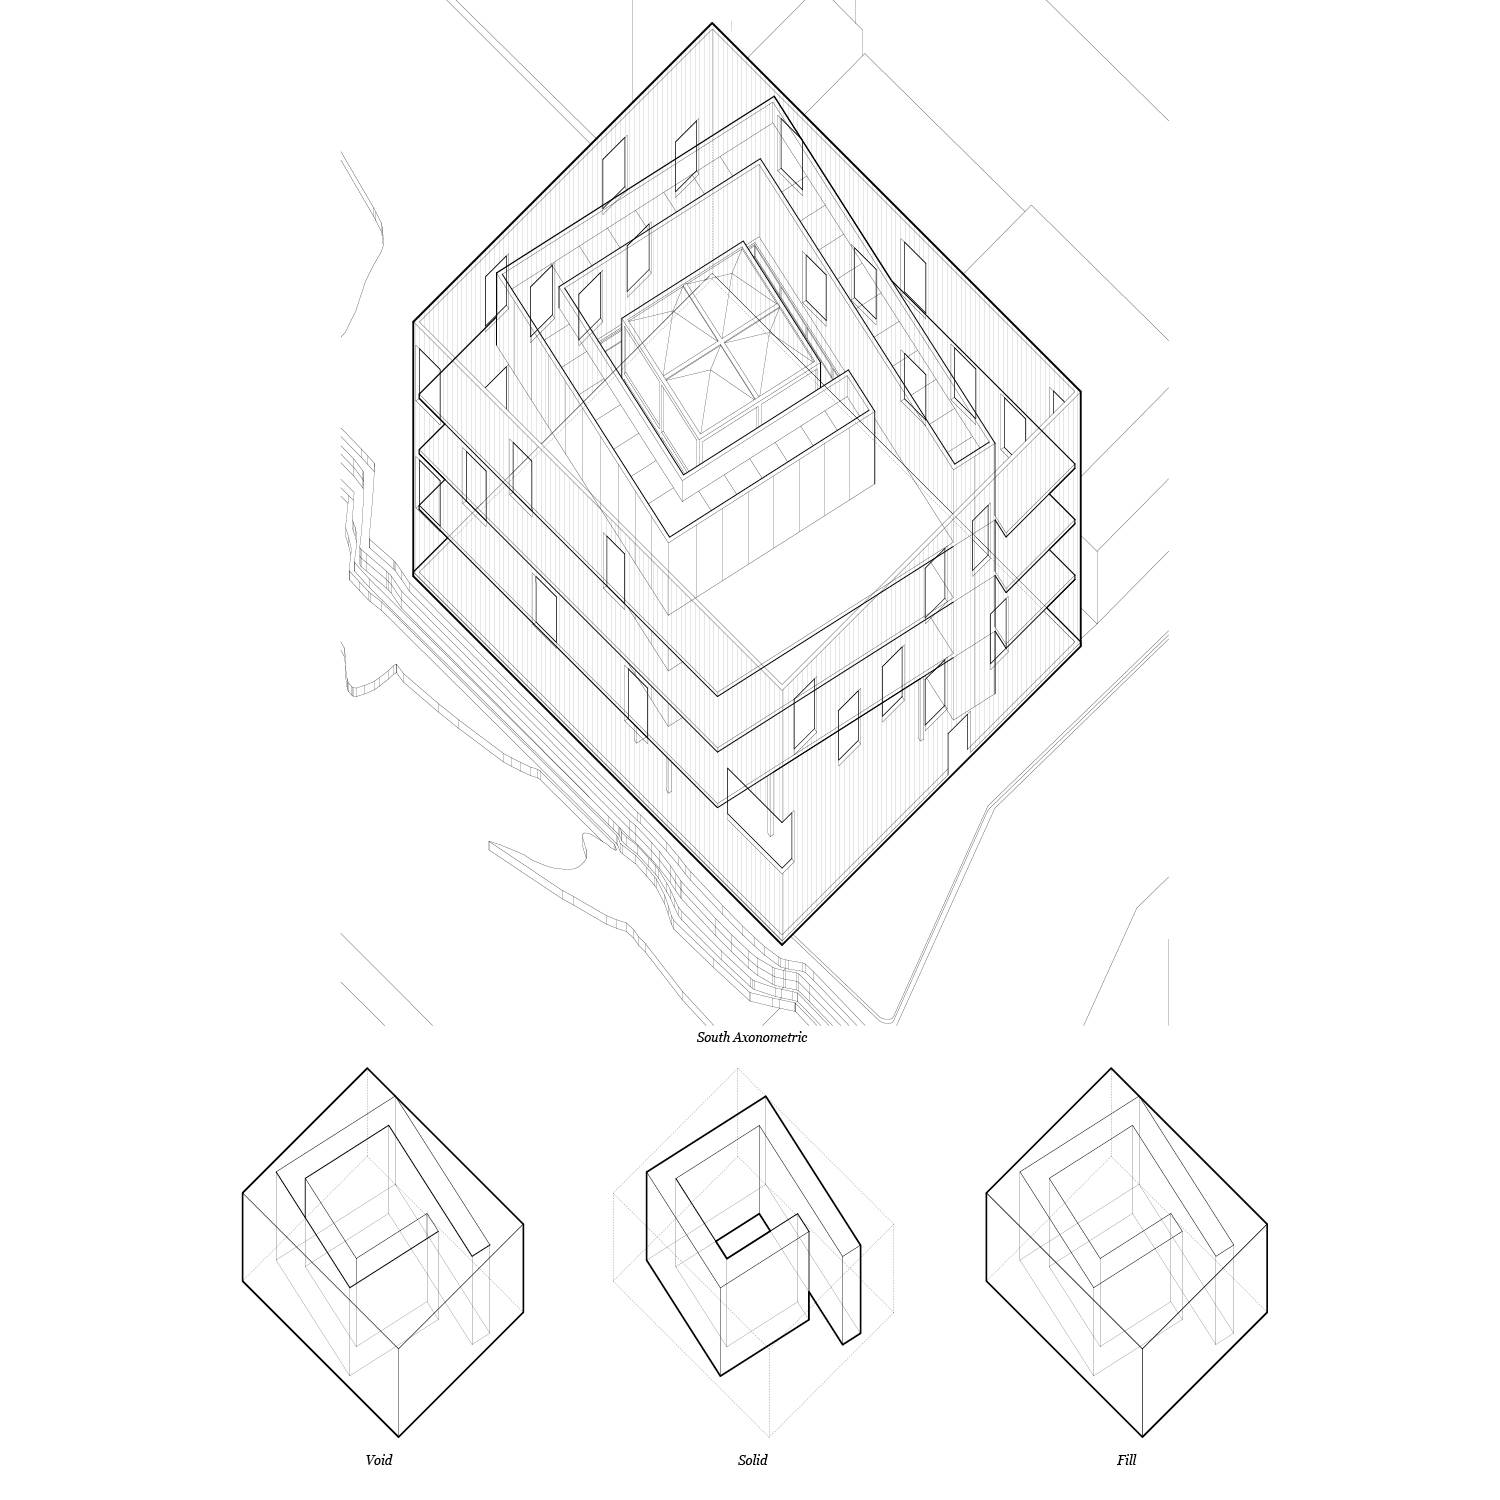 Coil shape within a cubed structure planning.